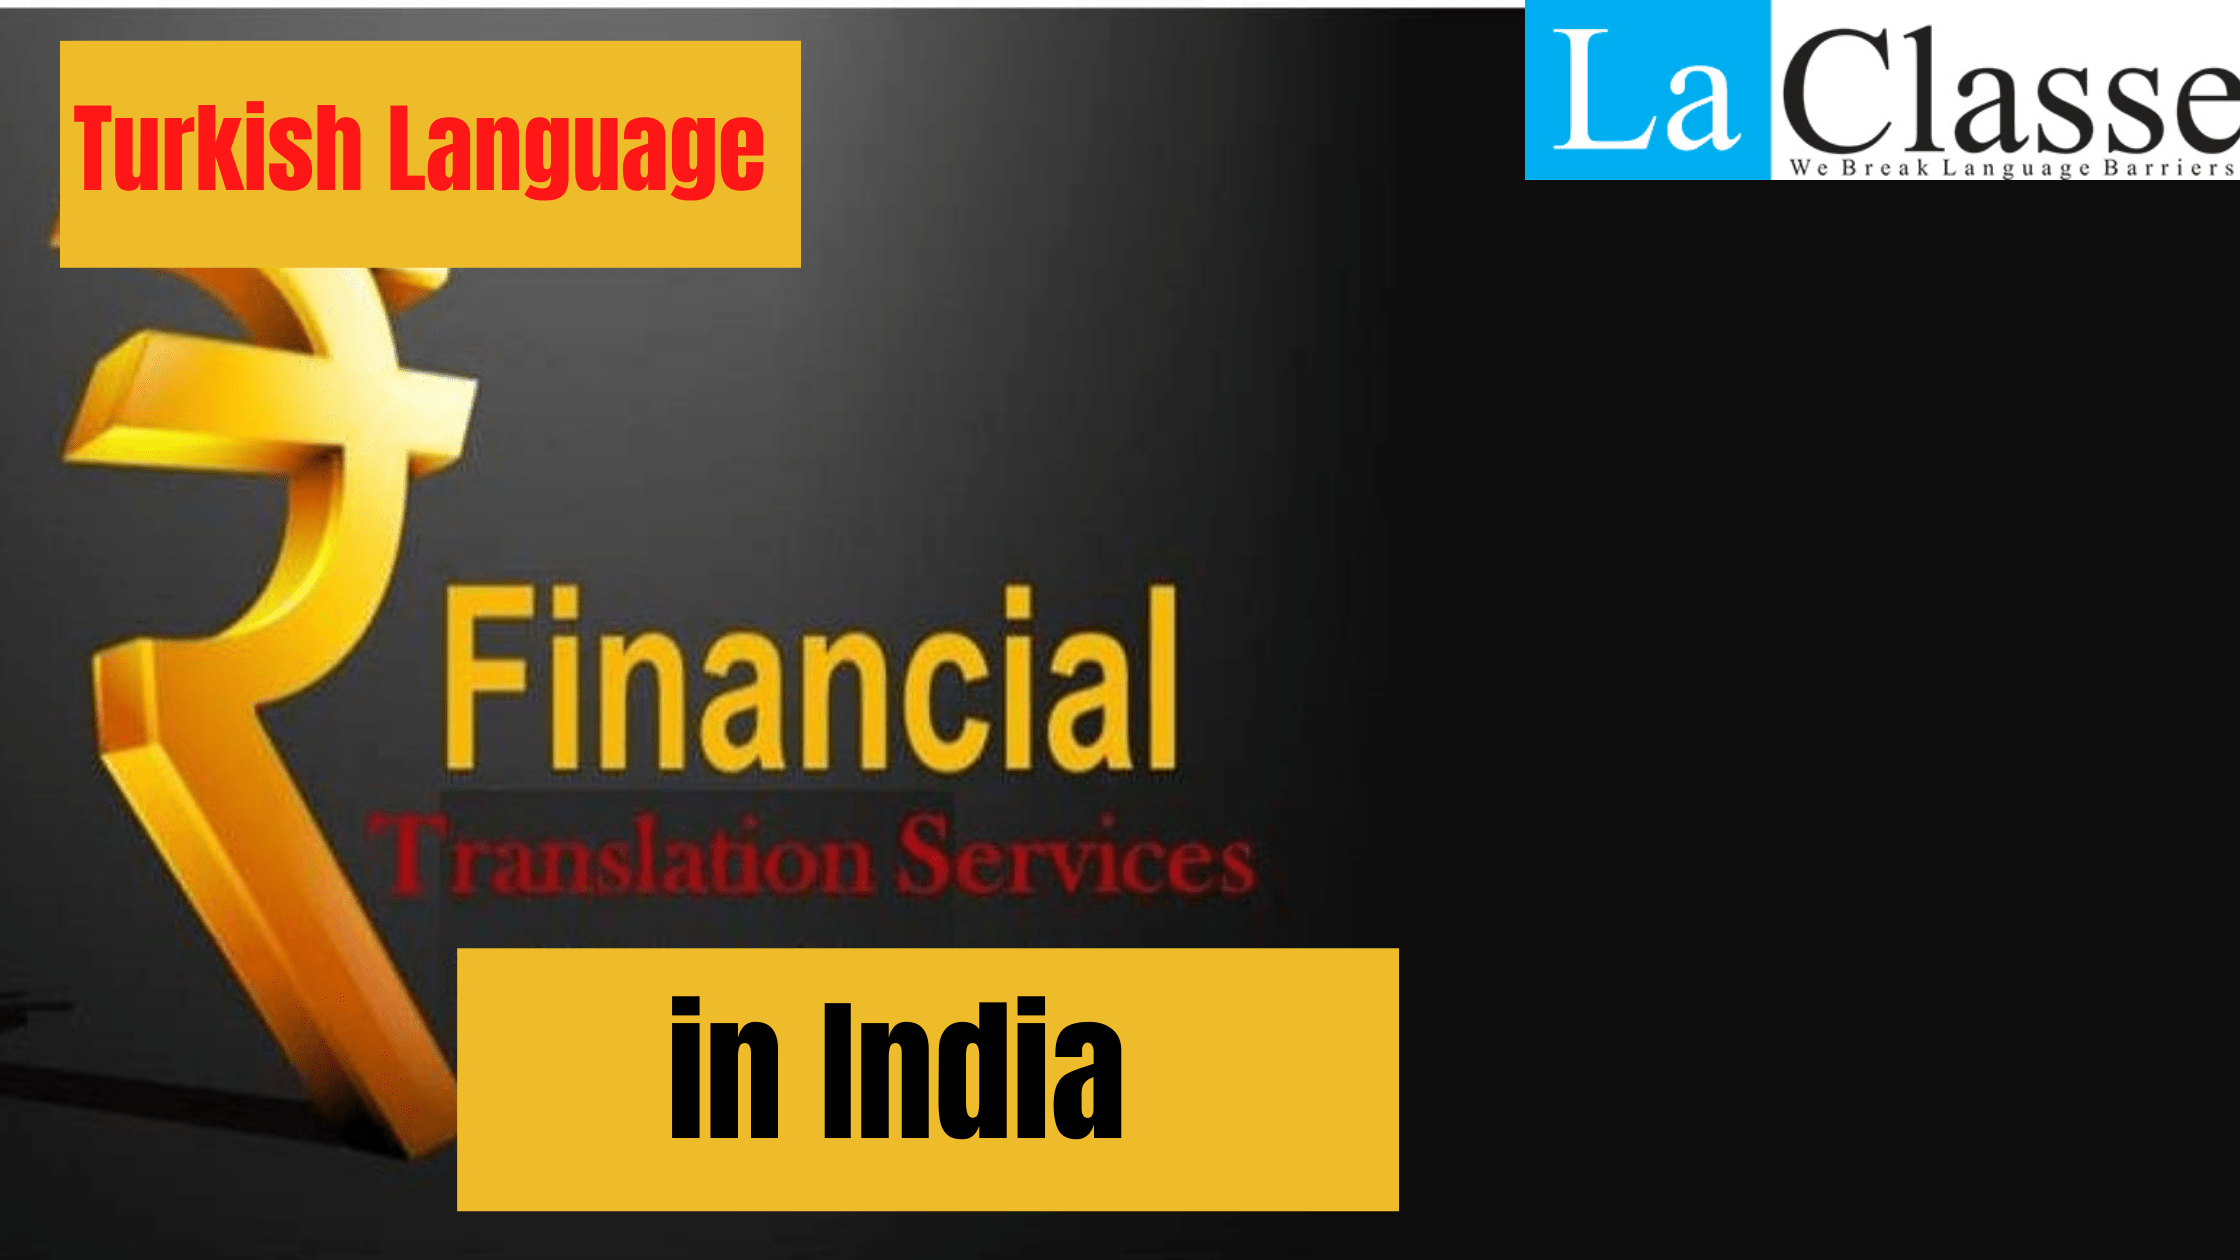 Turkish Language Financial Translation Services in India